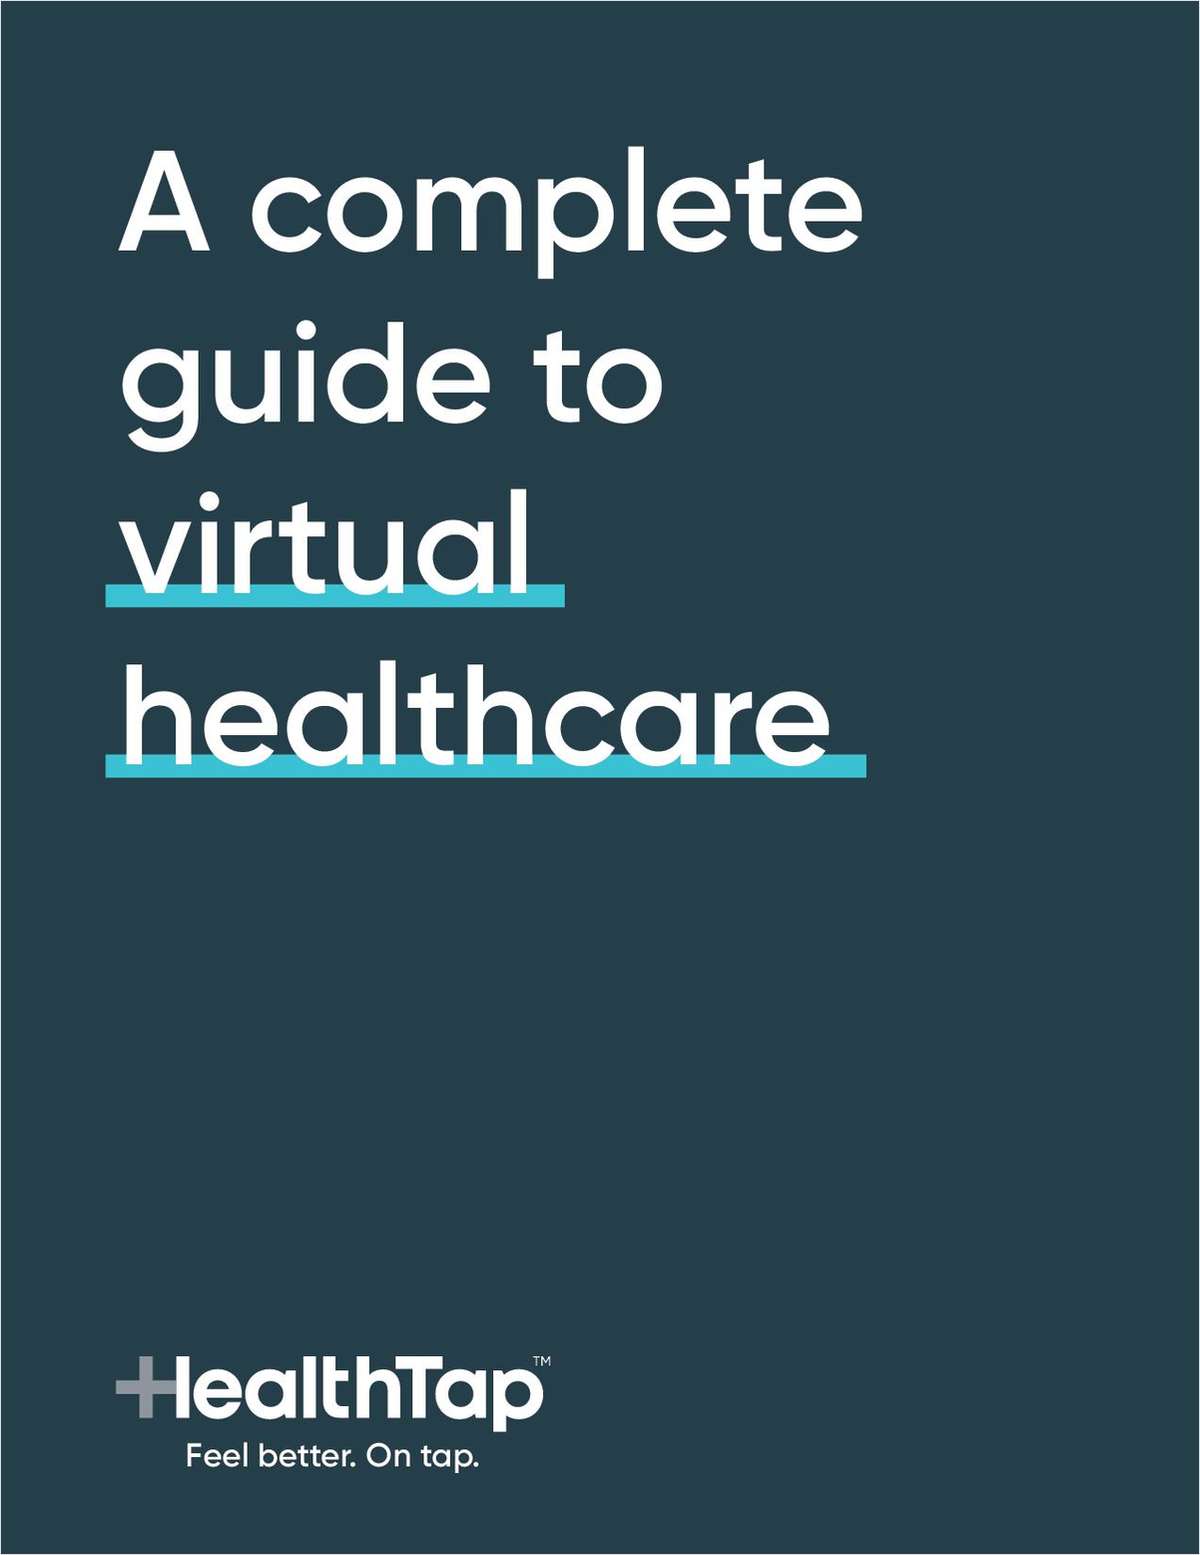 A Complete Guide to Virtual Healthcare